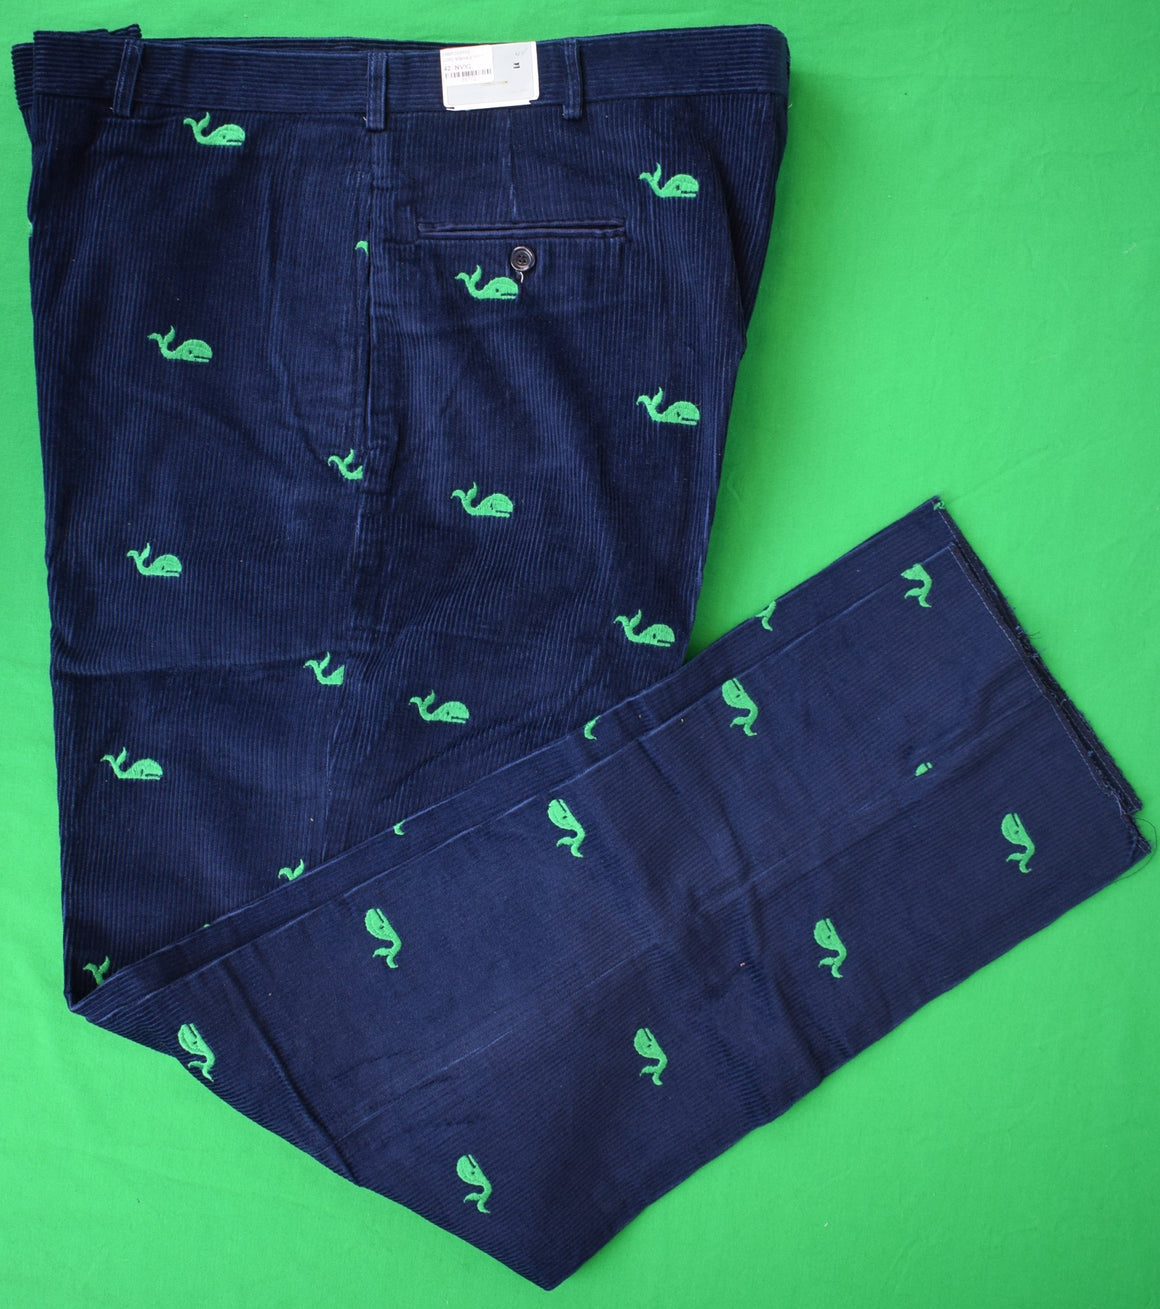 O'Connell's Navy Corduroy w/ Kelly Green Embroidered Whale Print Sz 42 (NWT)